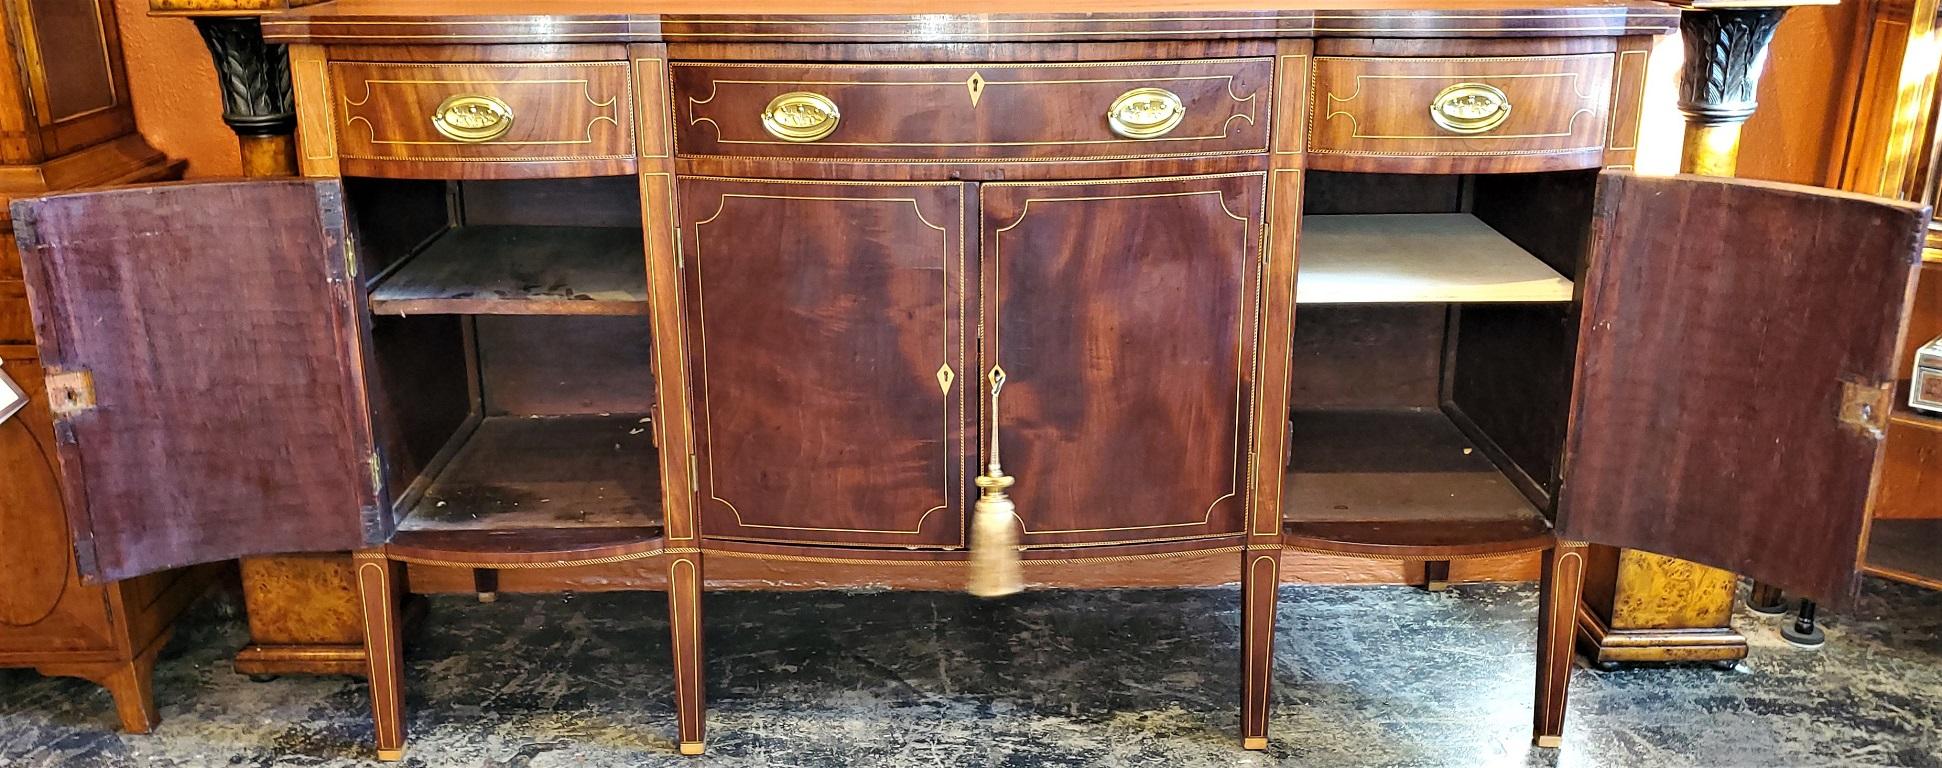 Early 19th Century American Sheraton Sideboard Attributable to Duncan Phyfe For Sale 12